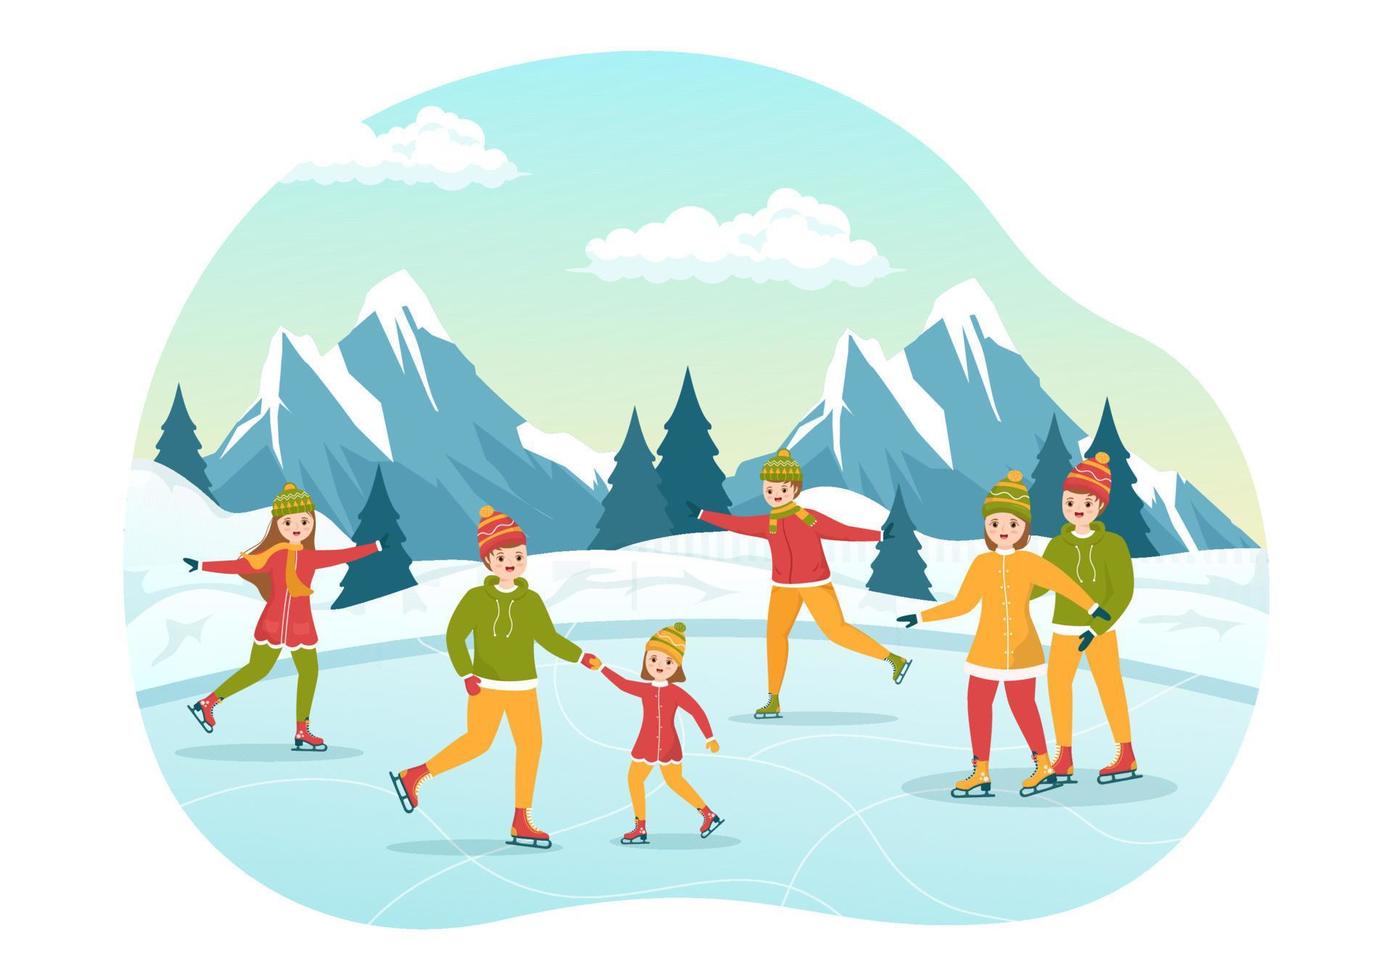 Men, Women and Kids Skating on Ice Rink Wearing Winter Clothes for Outdoor Activity in Flat Cartoon Hand Drawn Templates Illustration vector